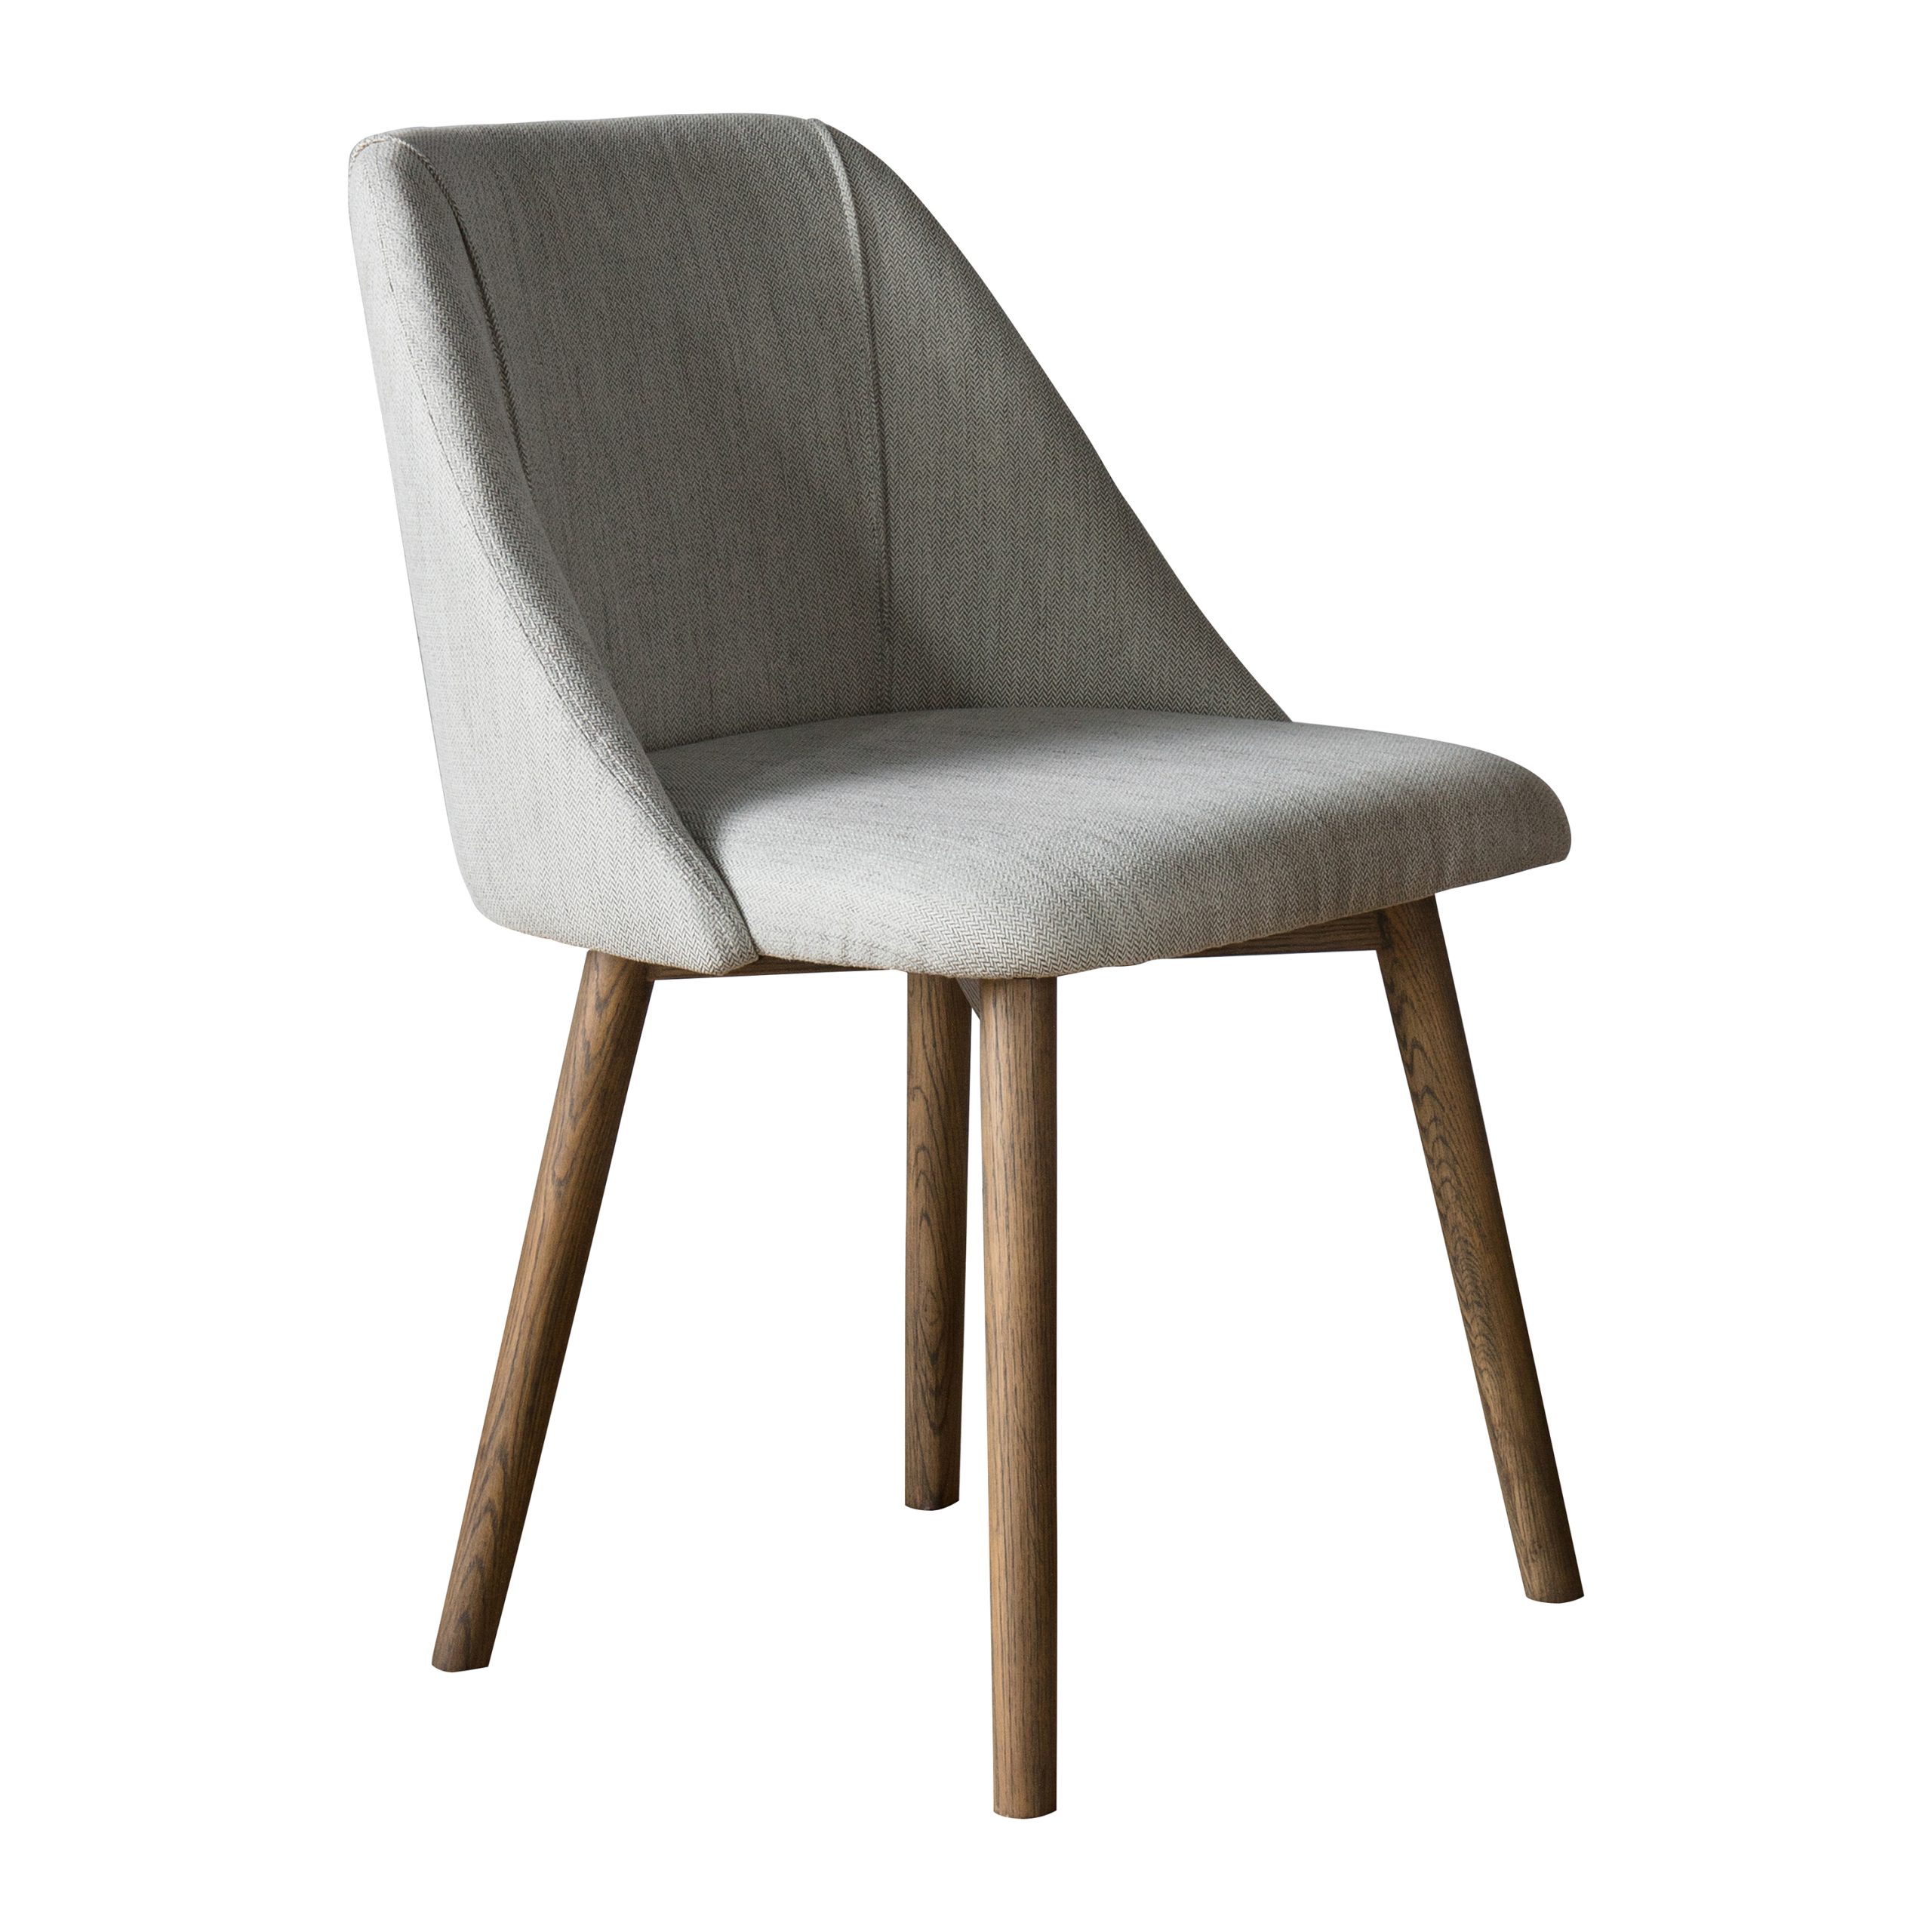 Gallery Direct Elliot Dining Chair Neutral (Set of 2)